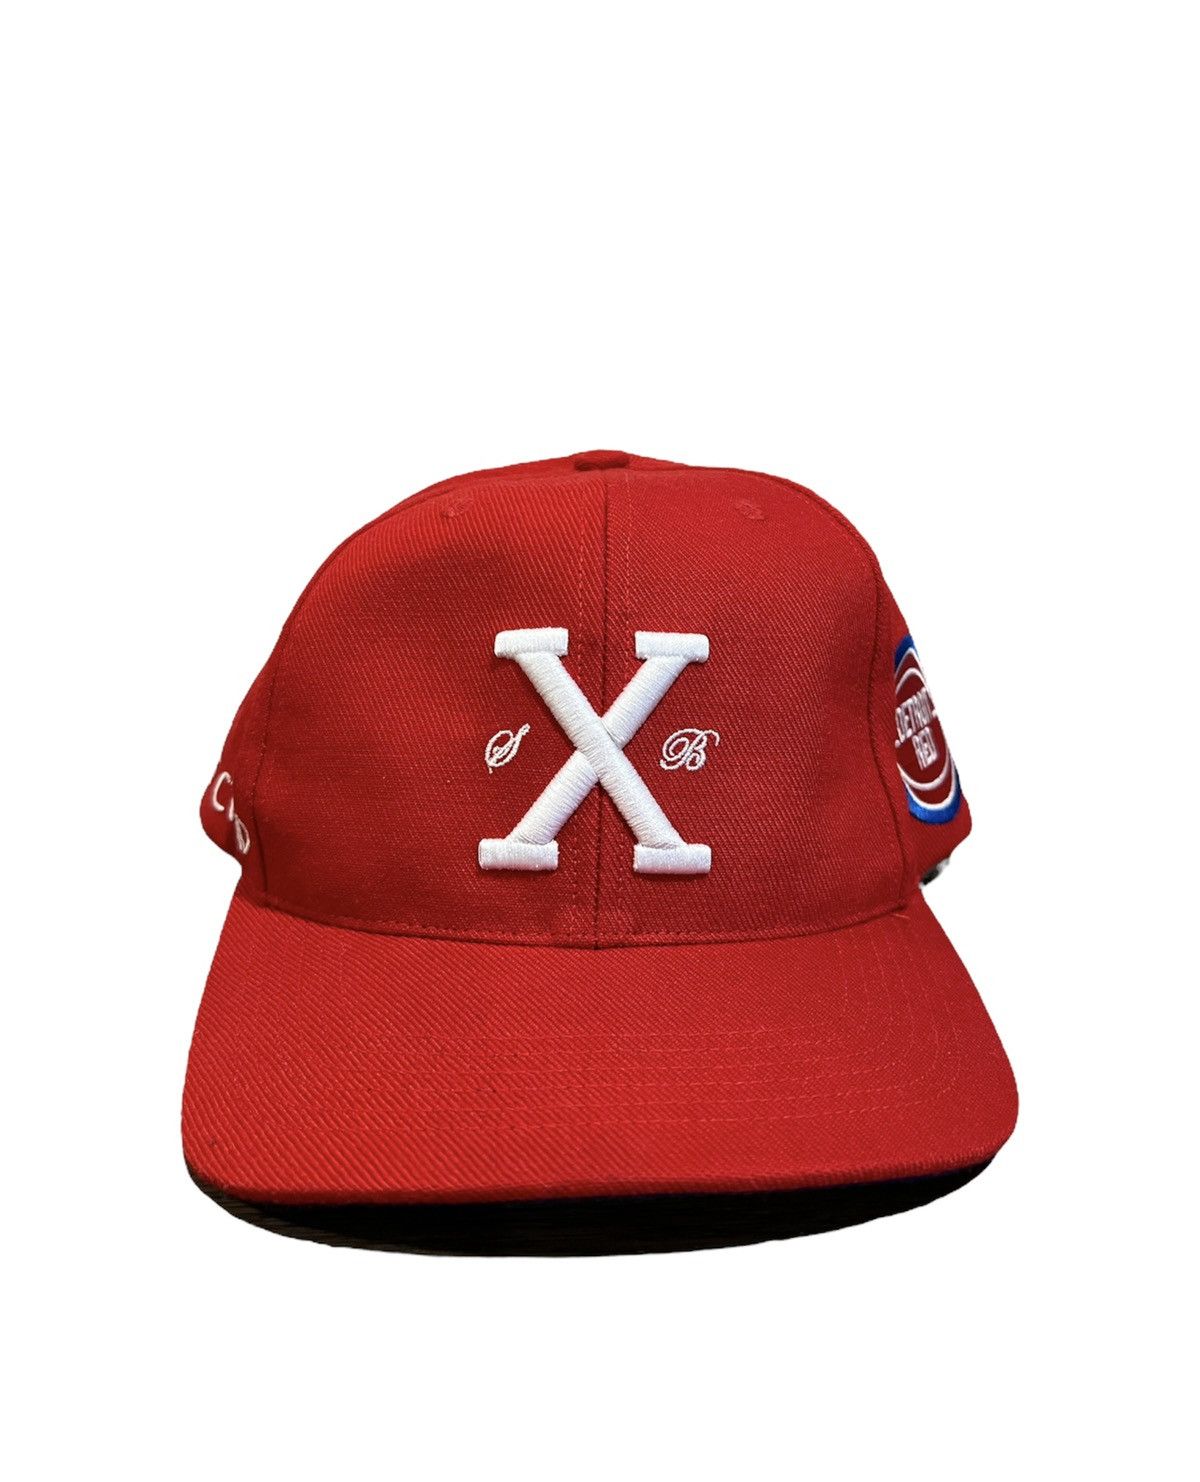 Tuff Crowd Tuff Crowd Detroit Red Snapback Hat Size ONE SIZE - 1 Preview